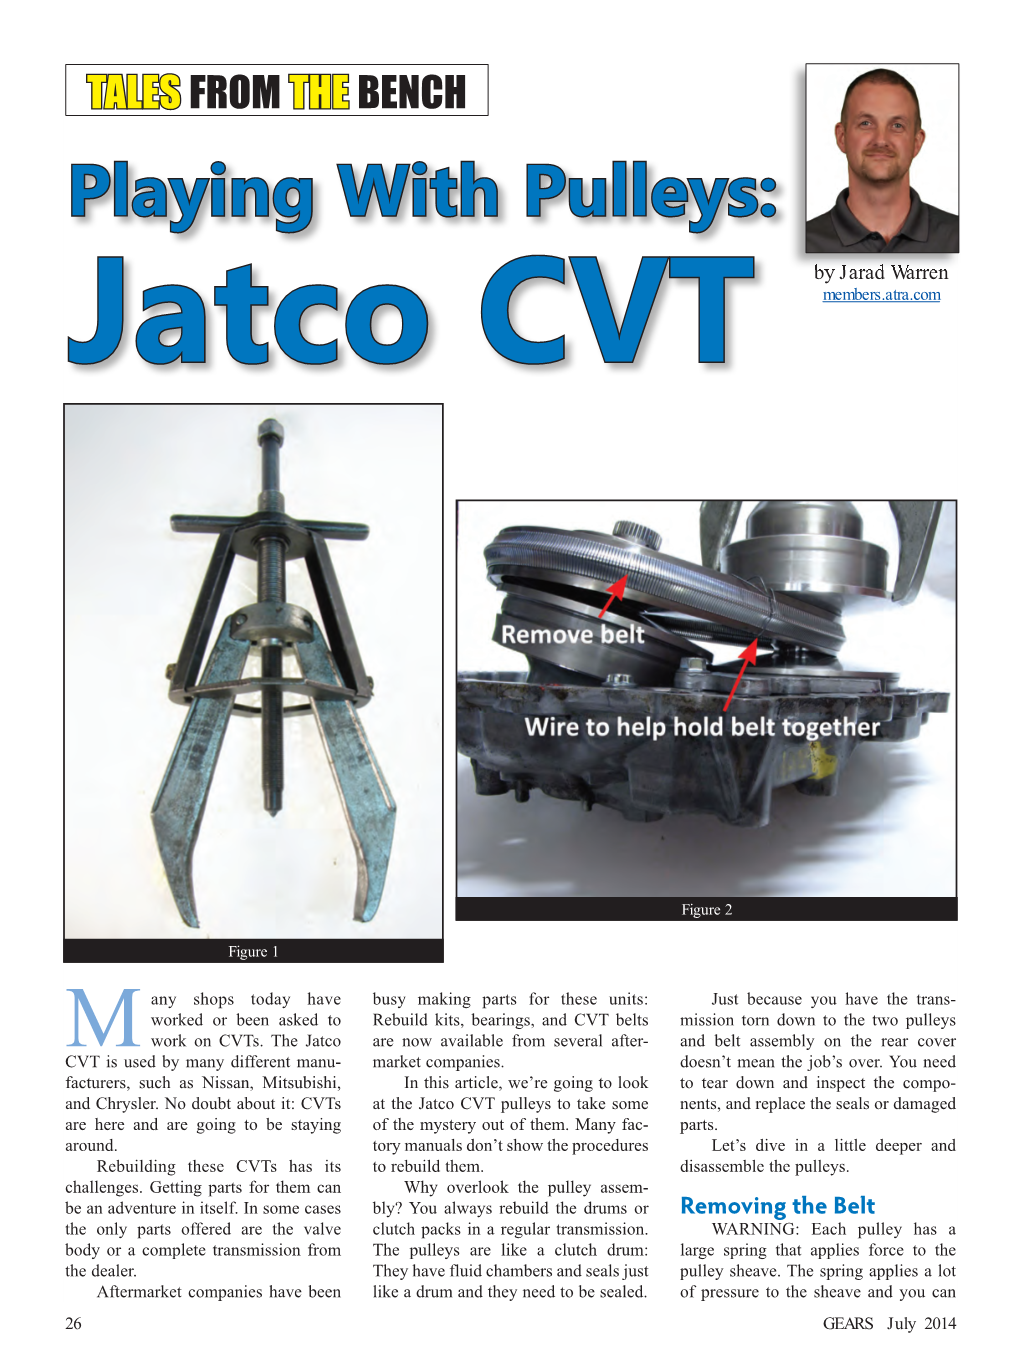 Jatco CVT TALES from the BENCH Playing with Pulleys